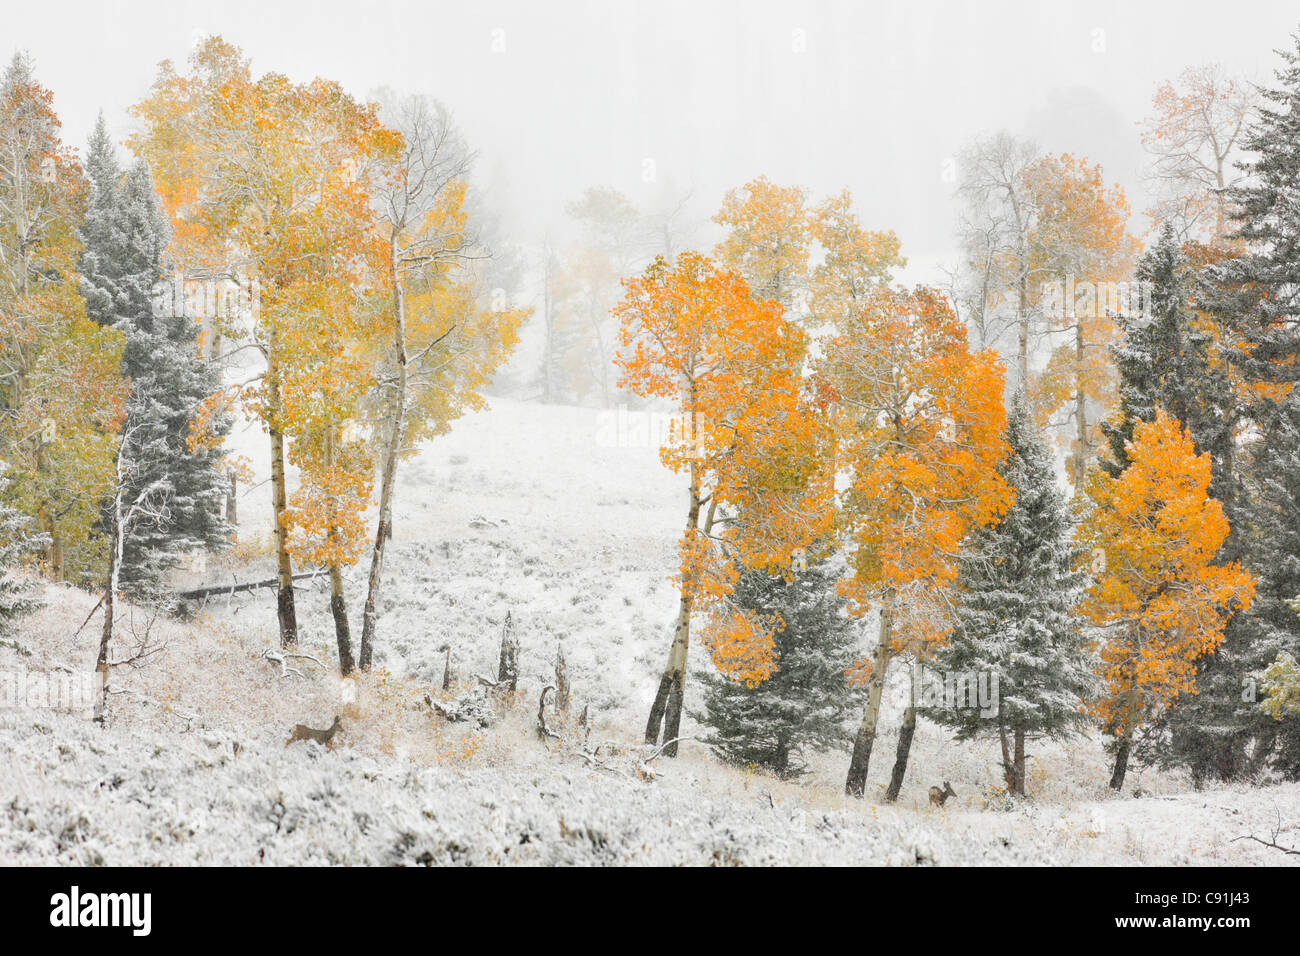 Two blacktail deer and fall colored Aspens covered in snow, Yellowstone National Park Stock Photo